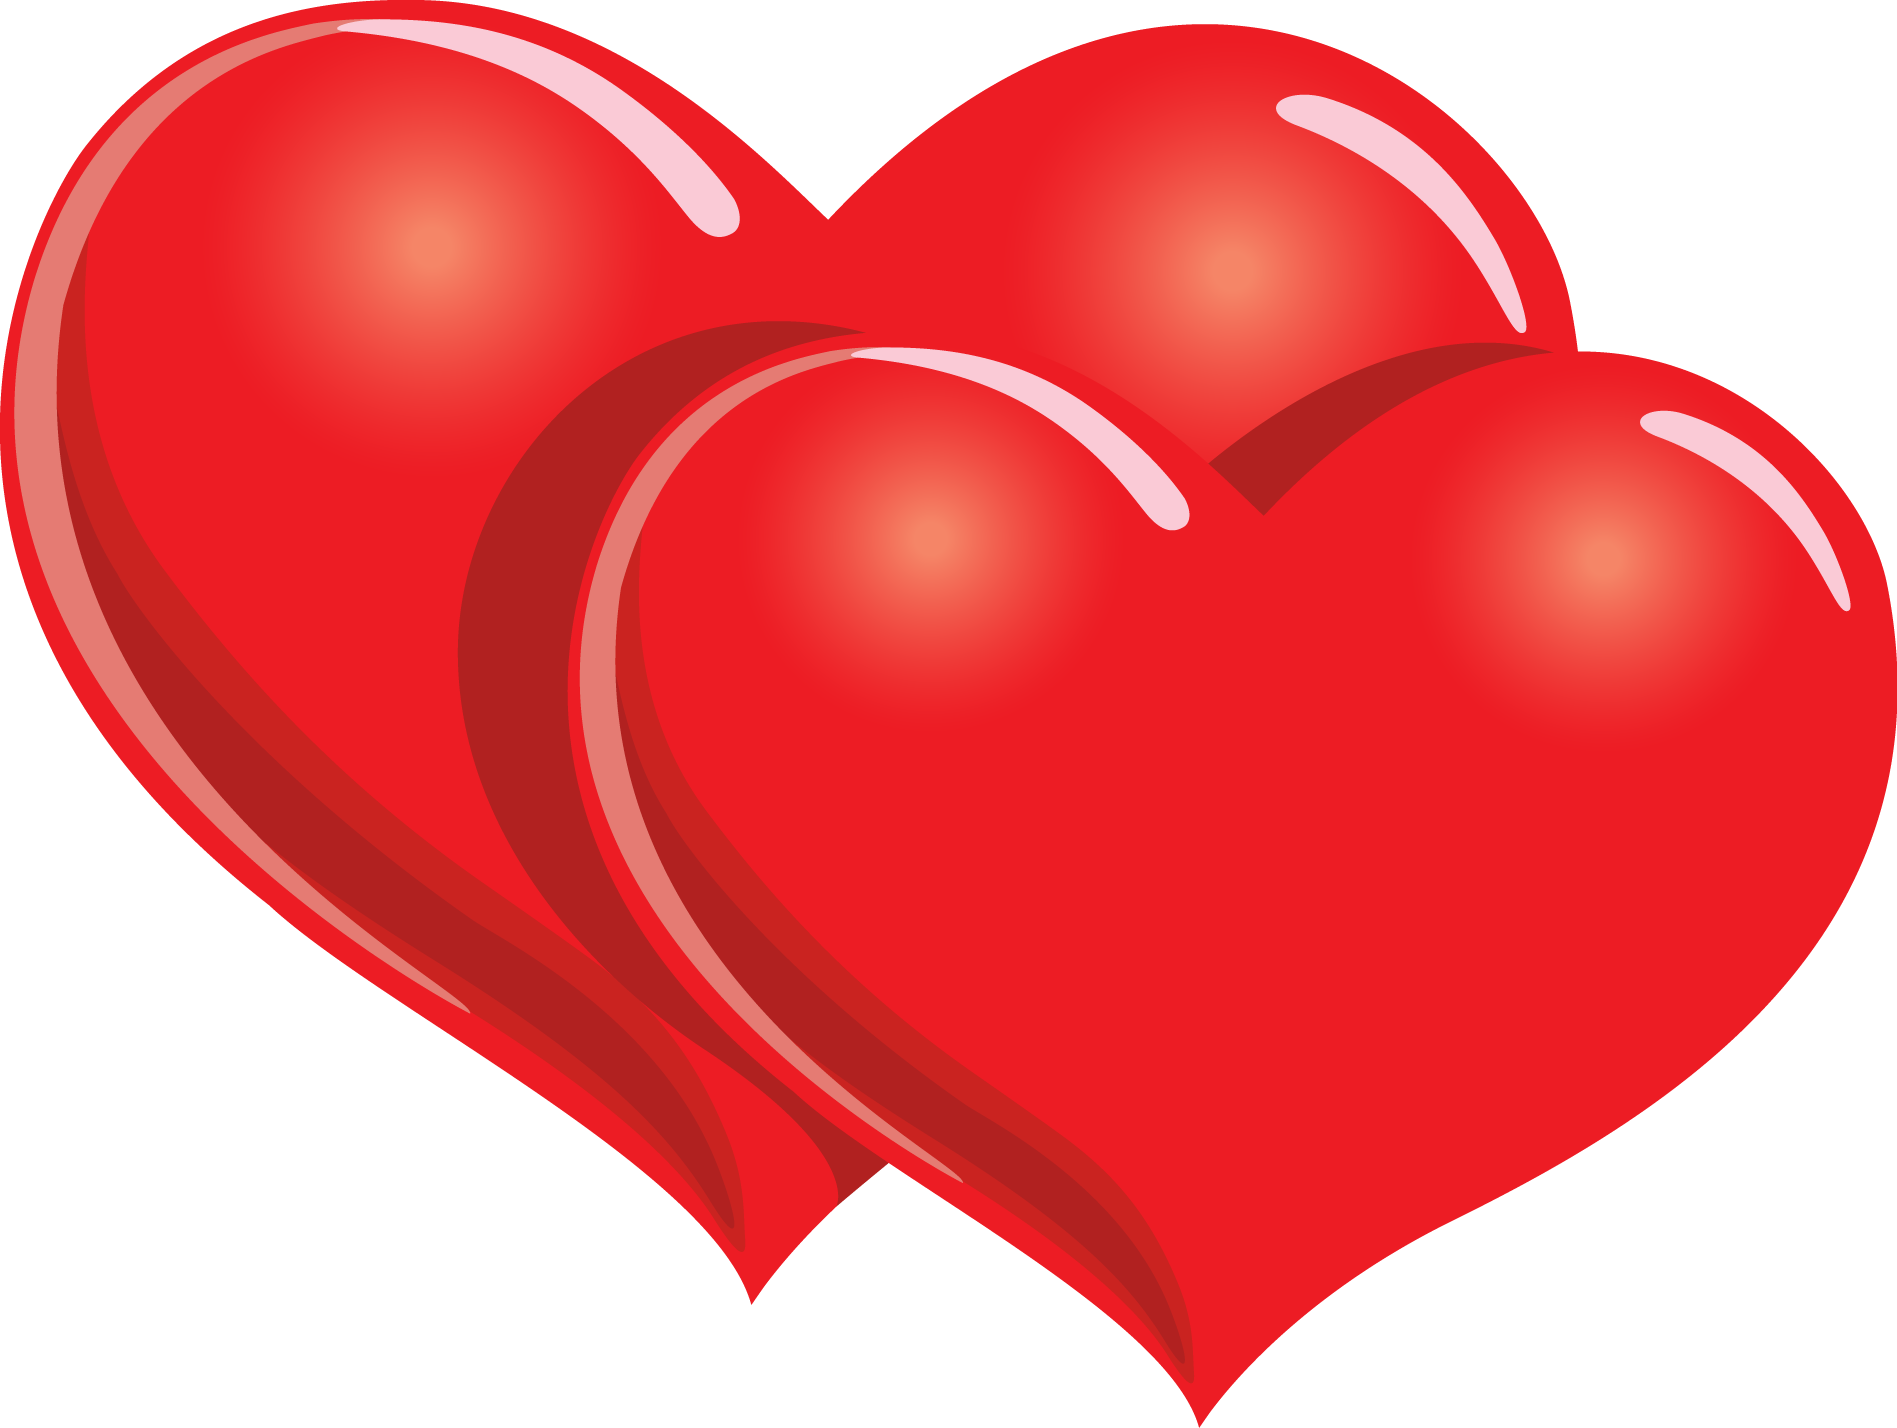 Red Heart Symbol - ClipArt Best